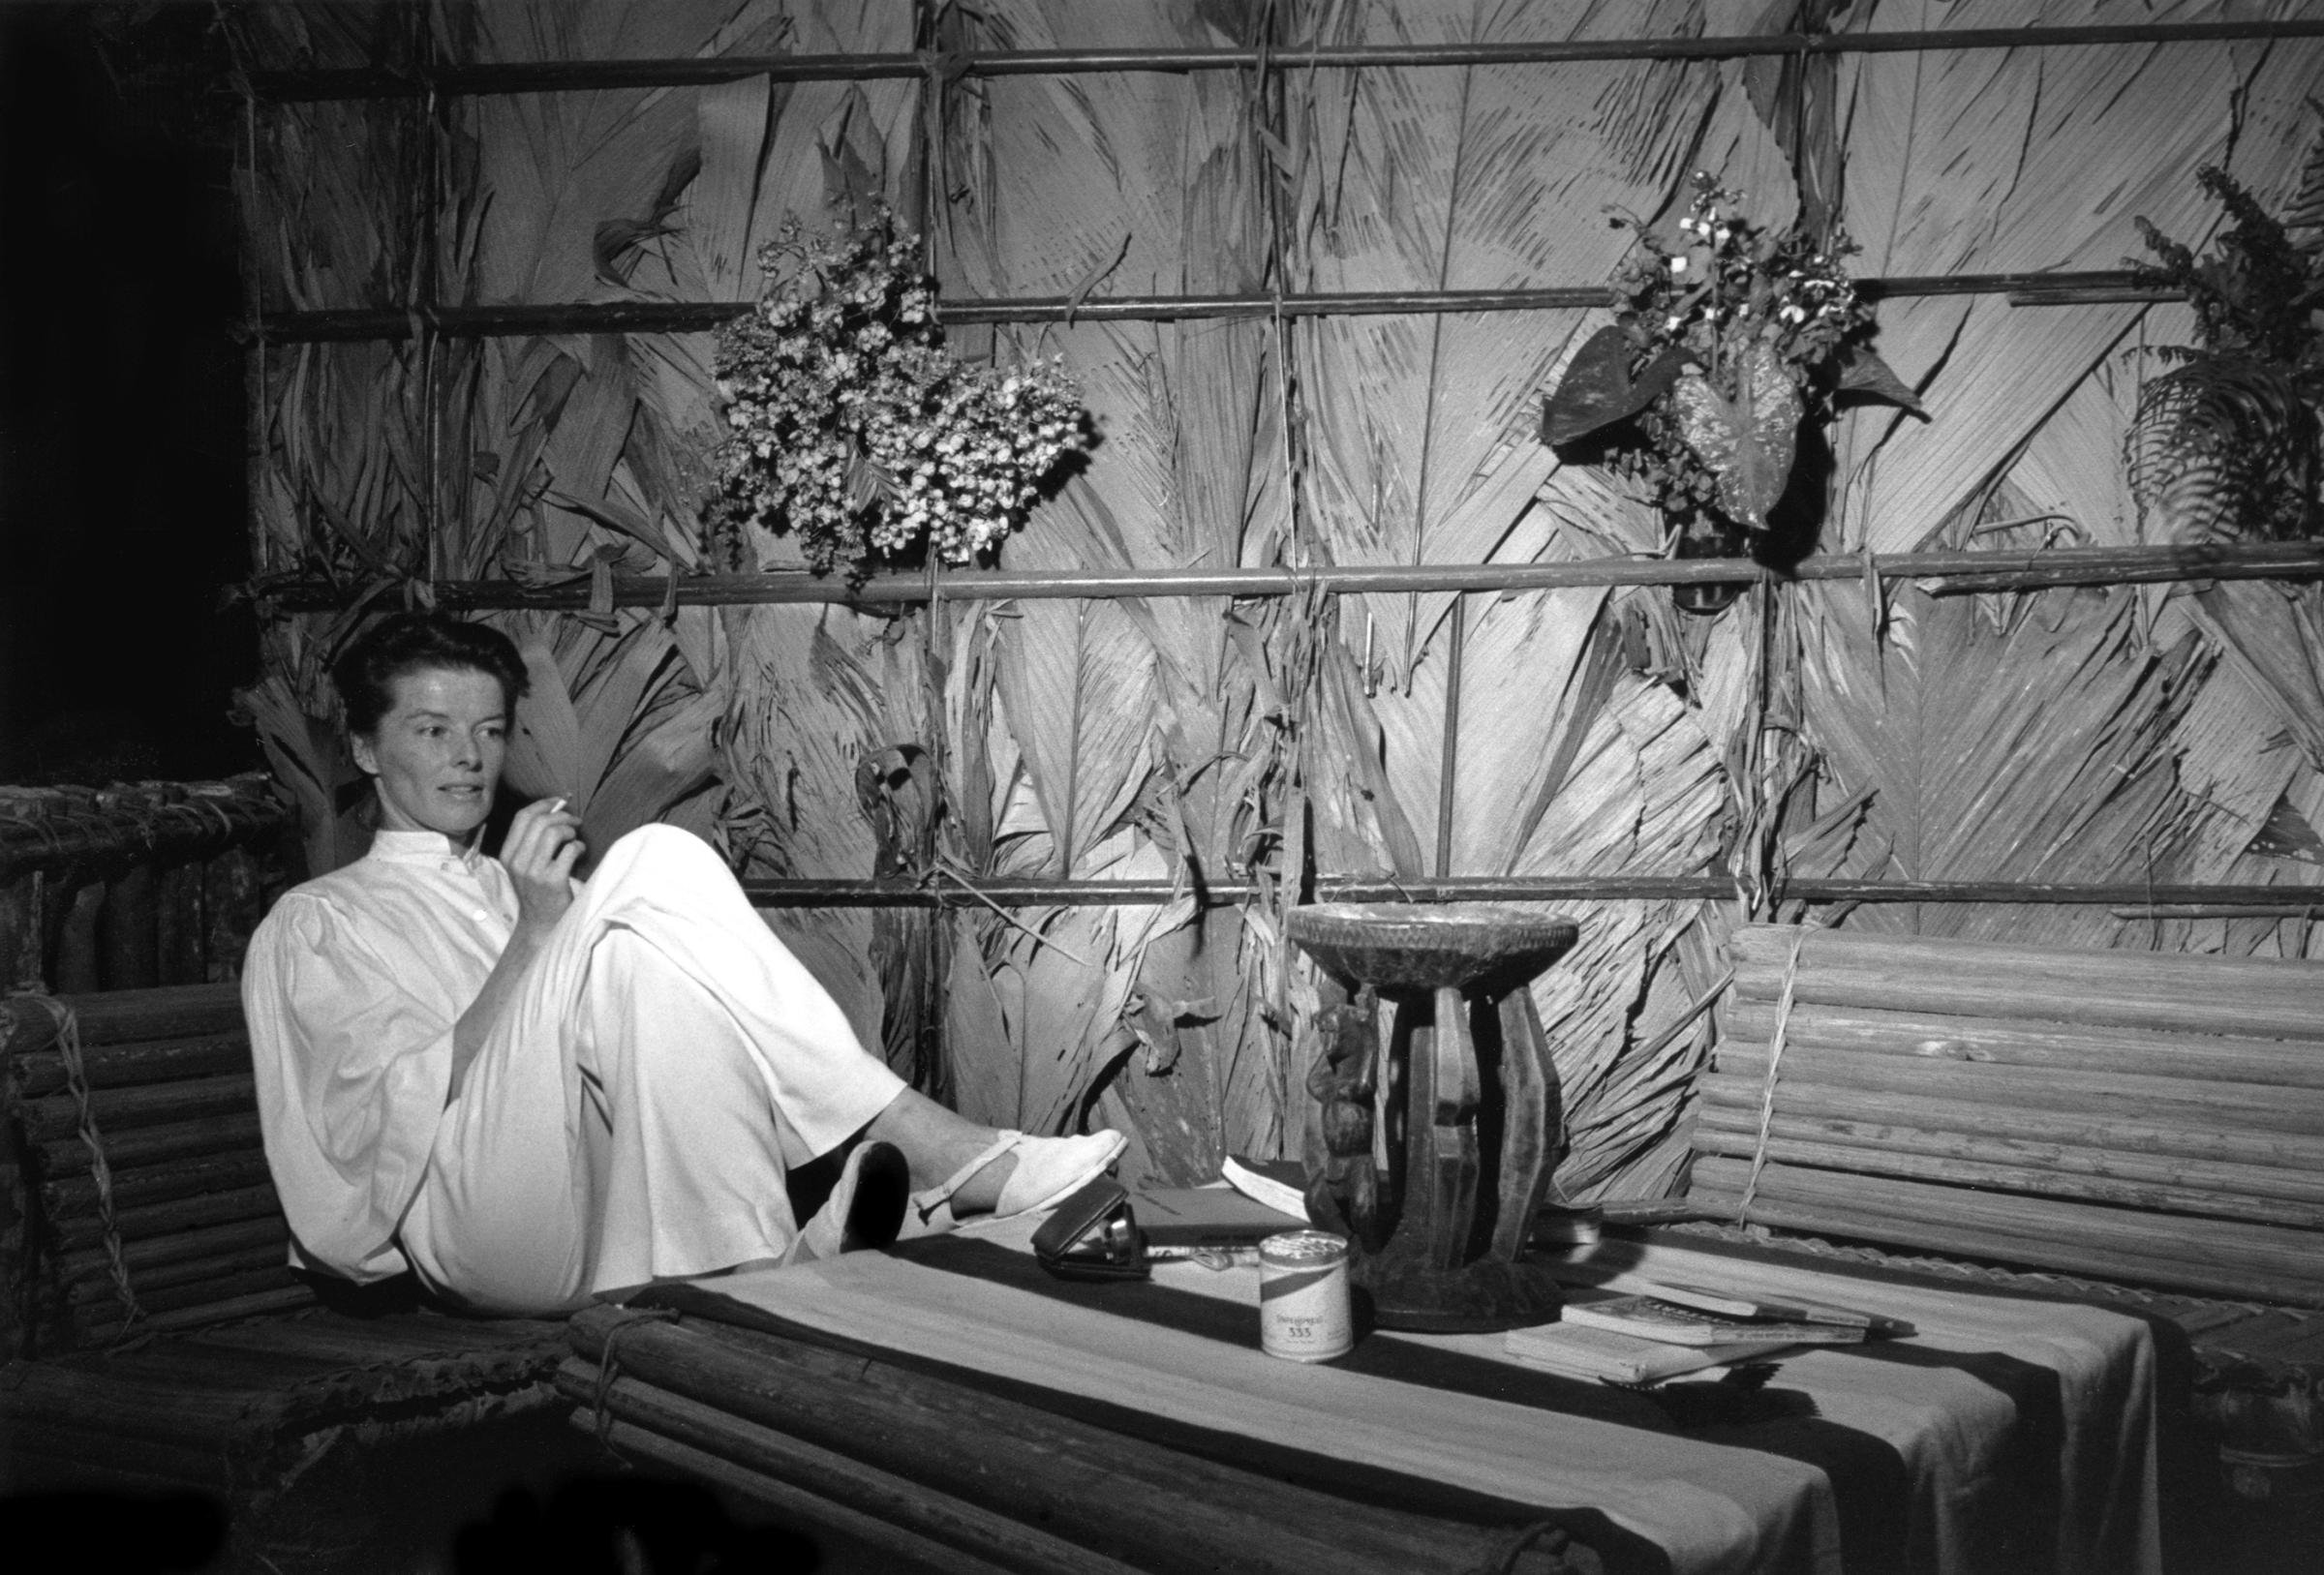 Katharine Hepburn allows LIFE's Eliot Elisofon inside her private bungalow during filming of The African Queen.